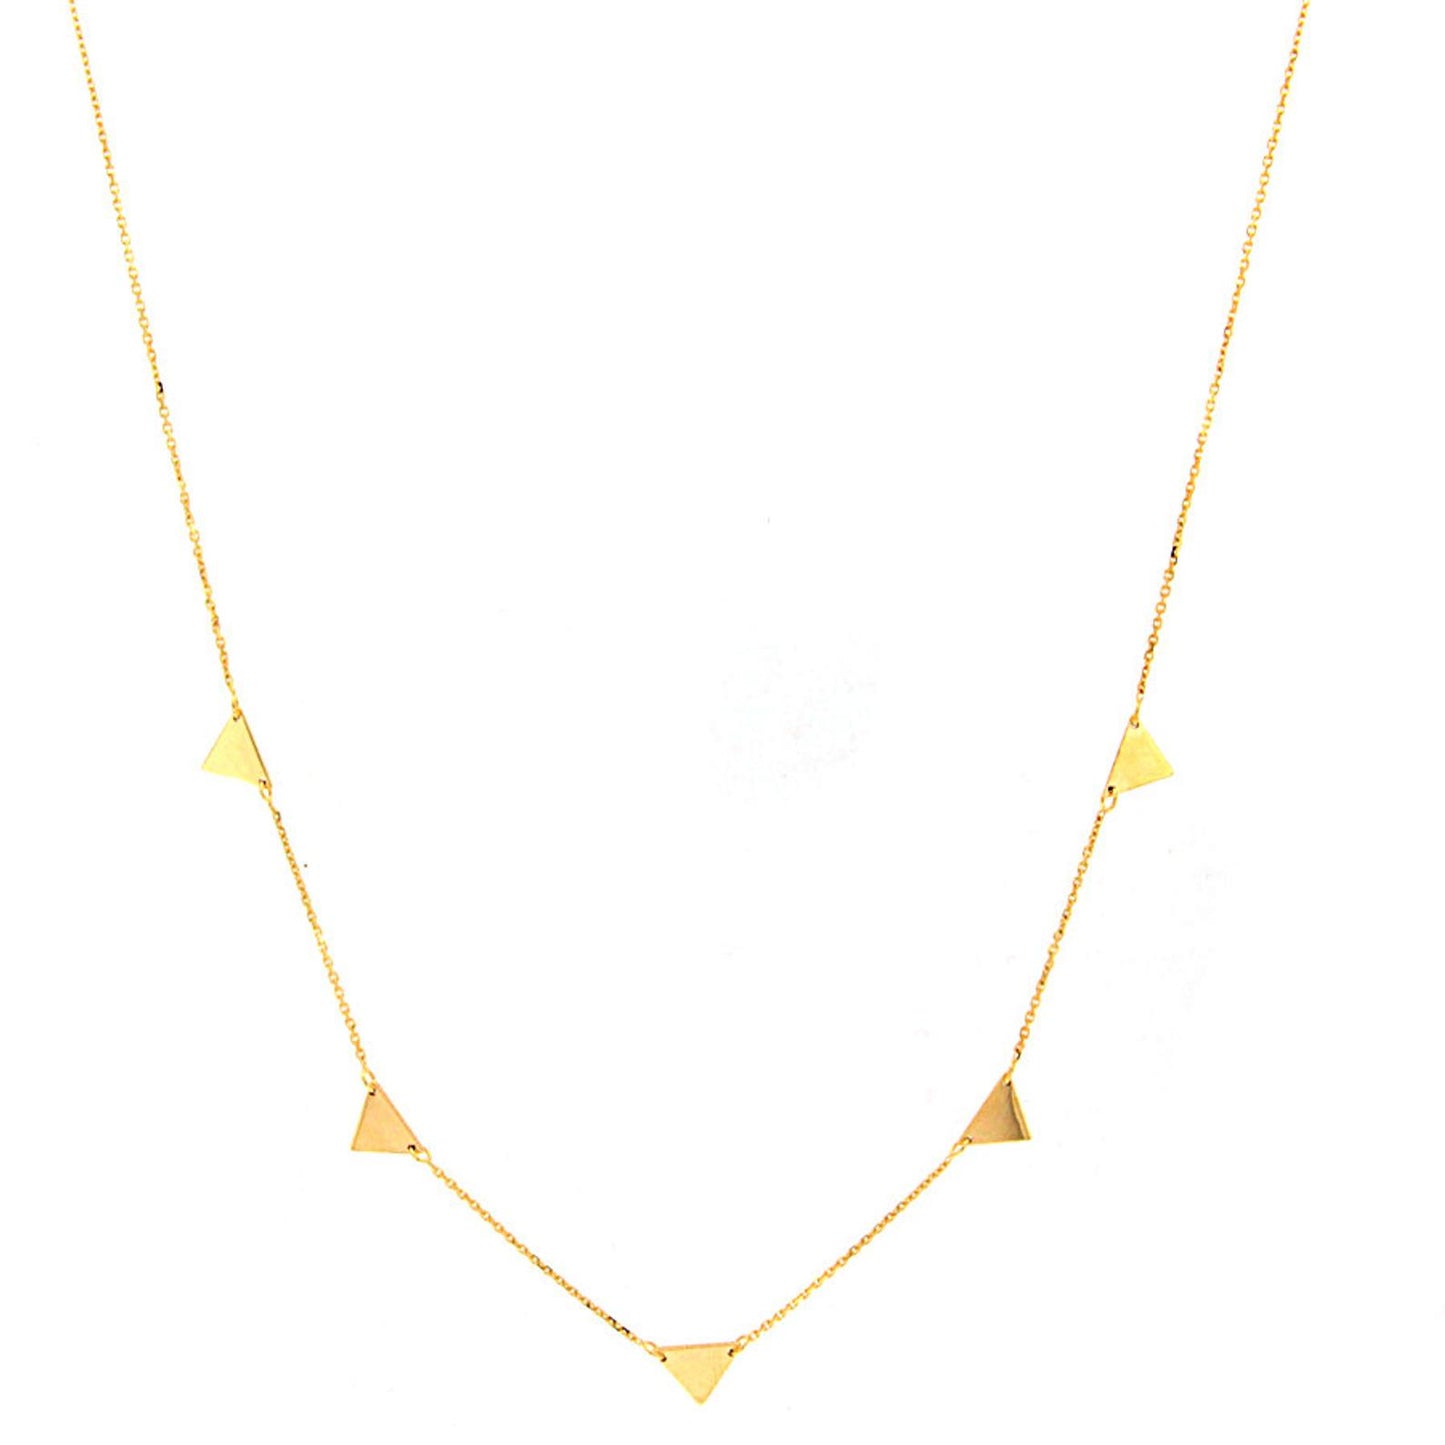 14K Yellow Solid Gold Triangle Necklace with Adjustable Chain 16-18"